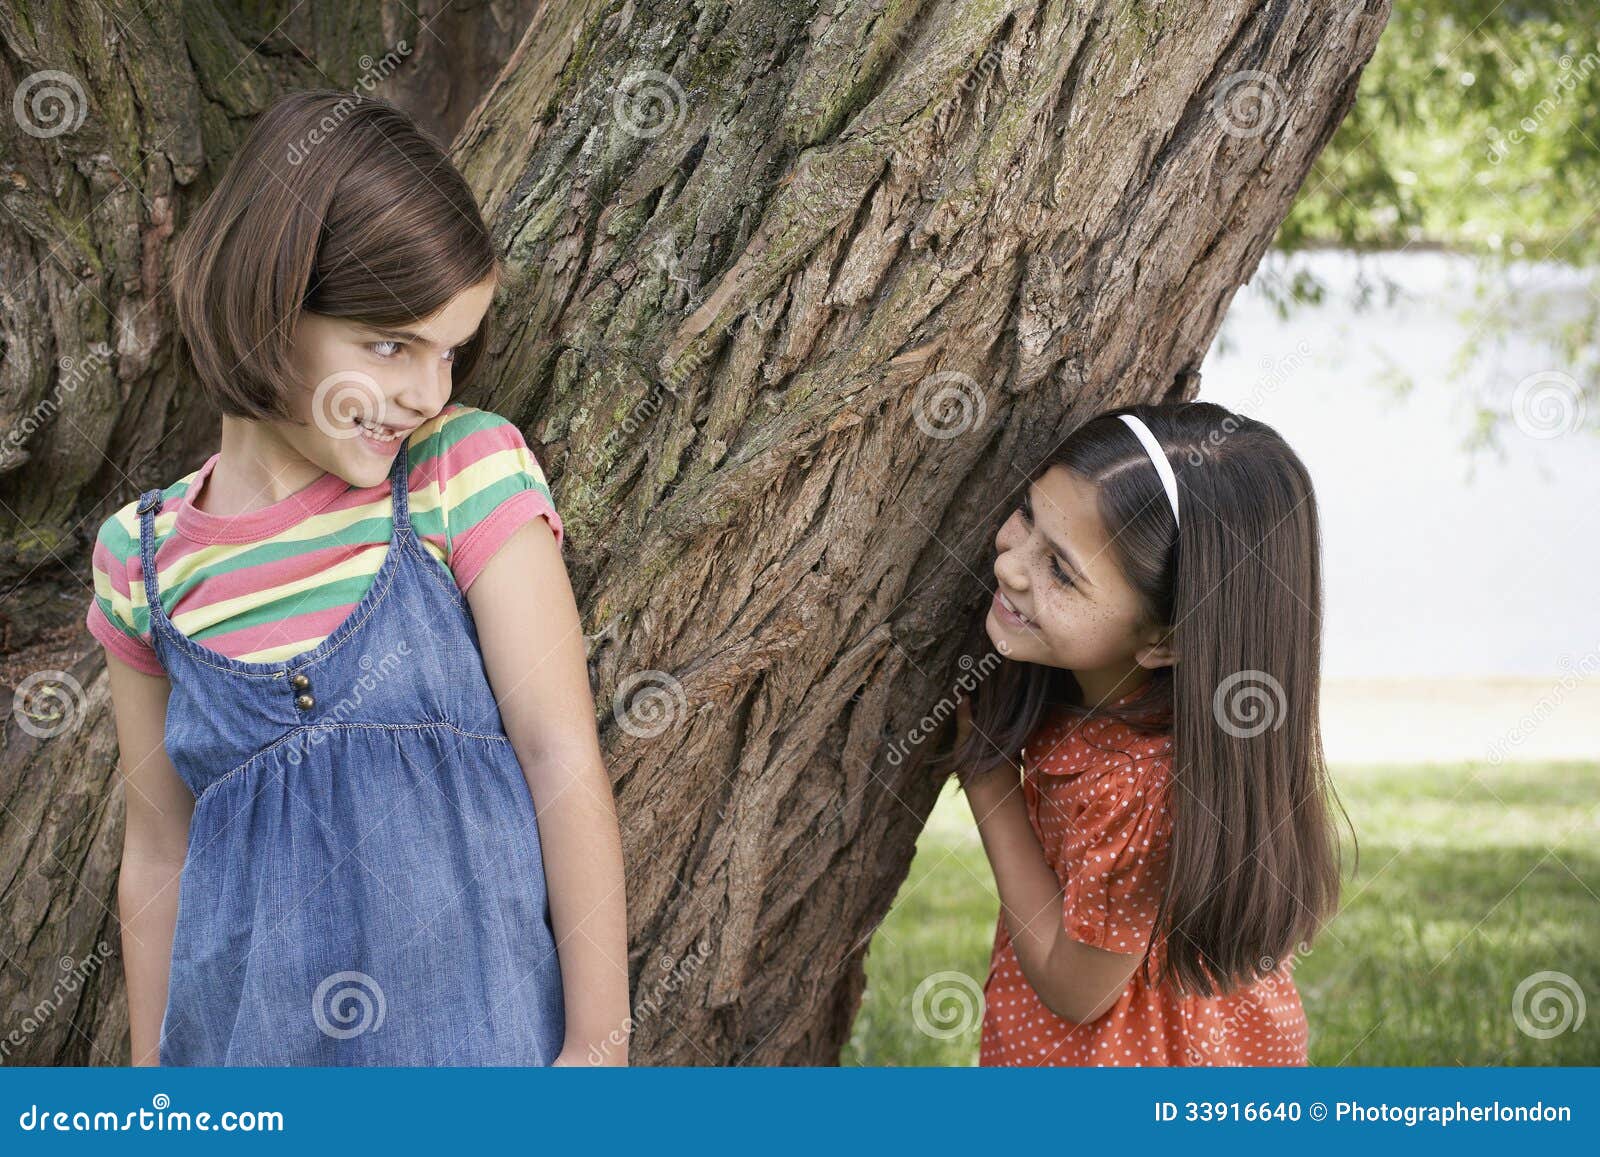 girls playing hide and seek by tree